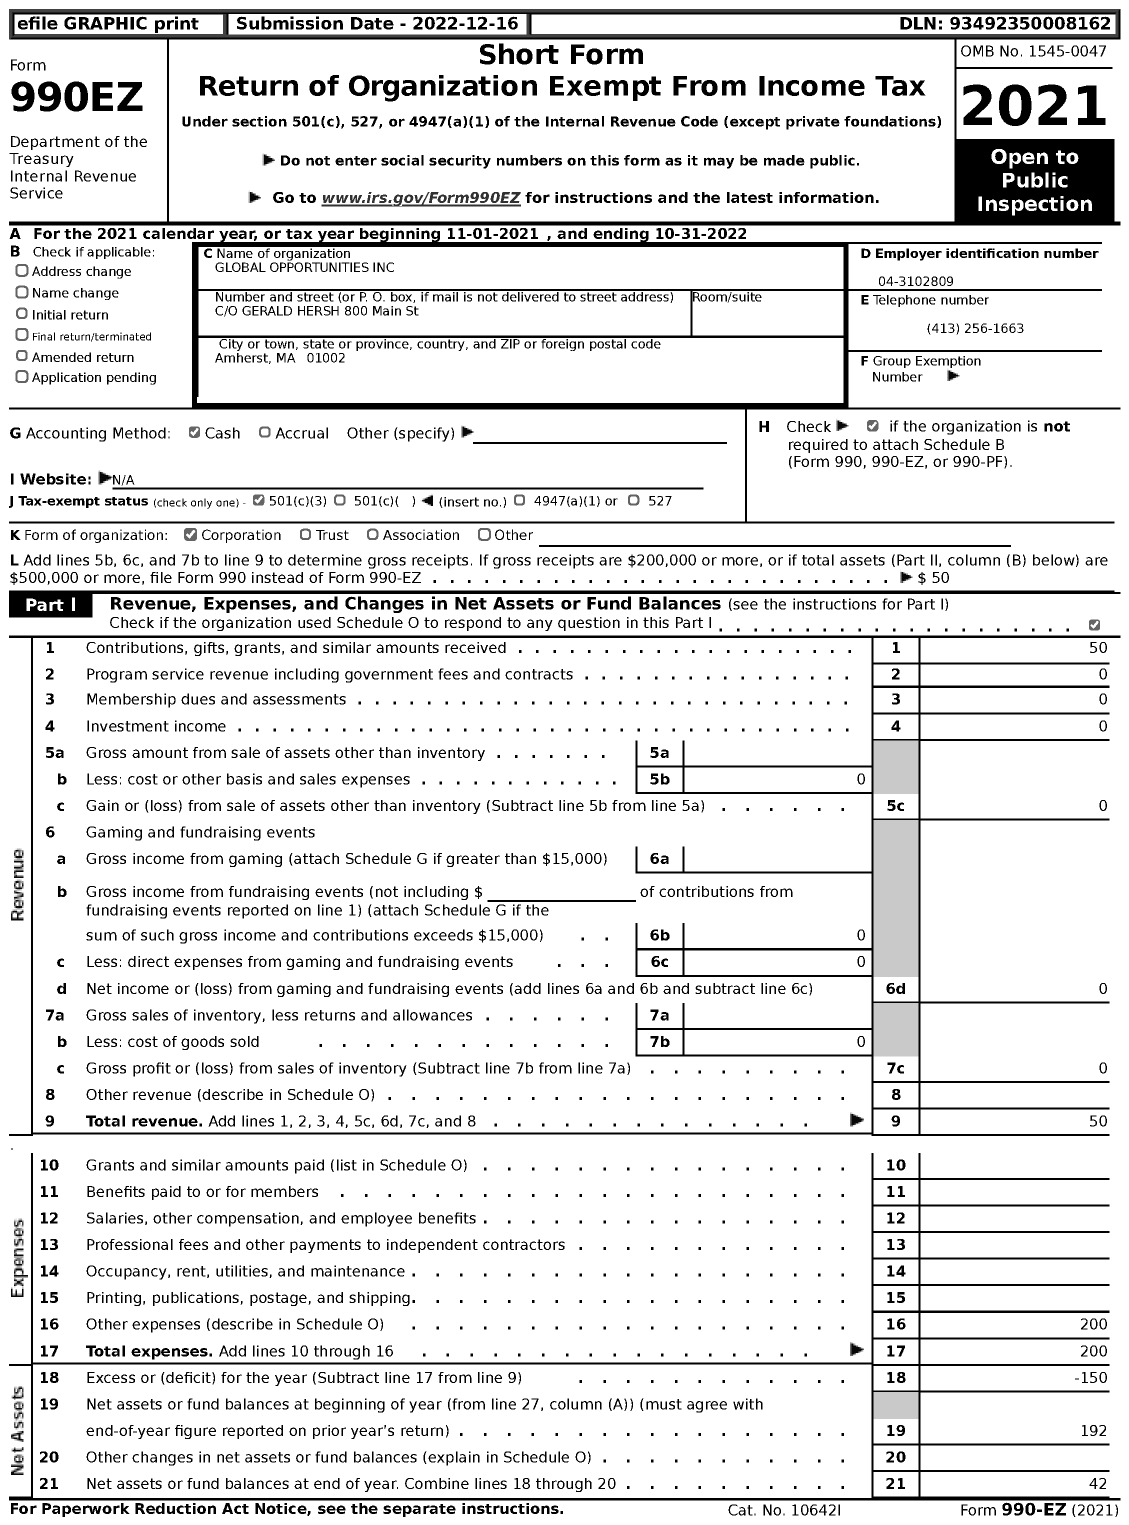 Image of first page of 2021 Form 990EZ for Global Opportunities